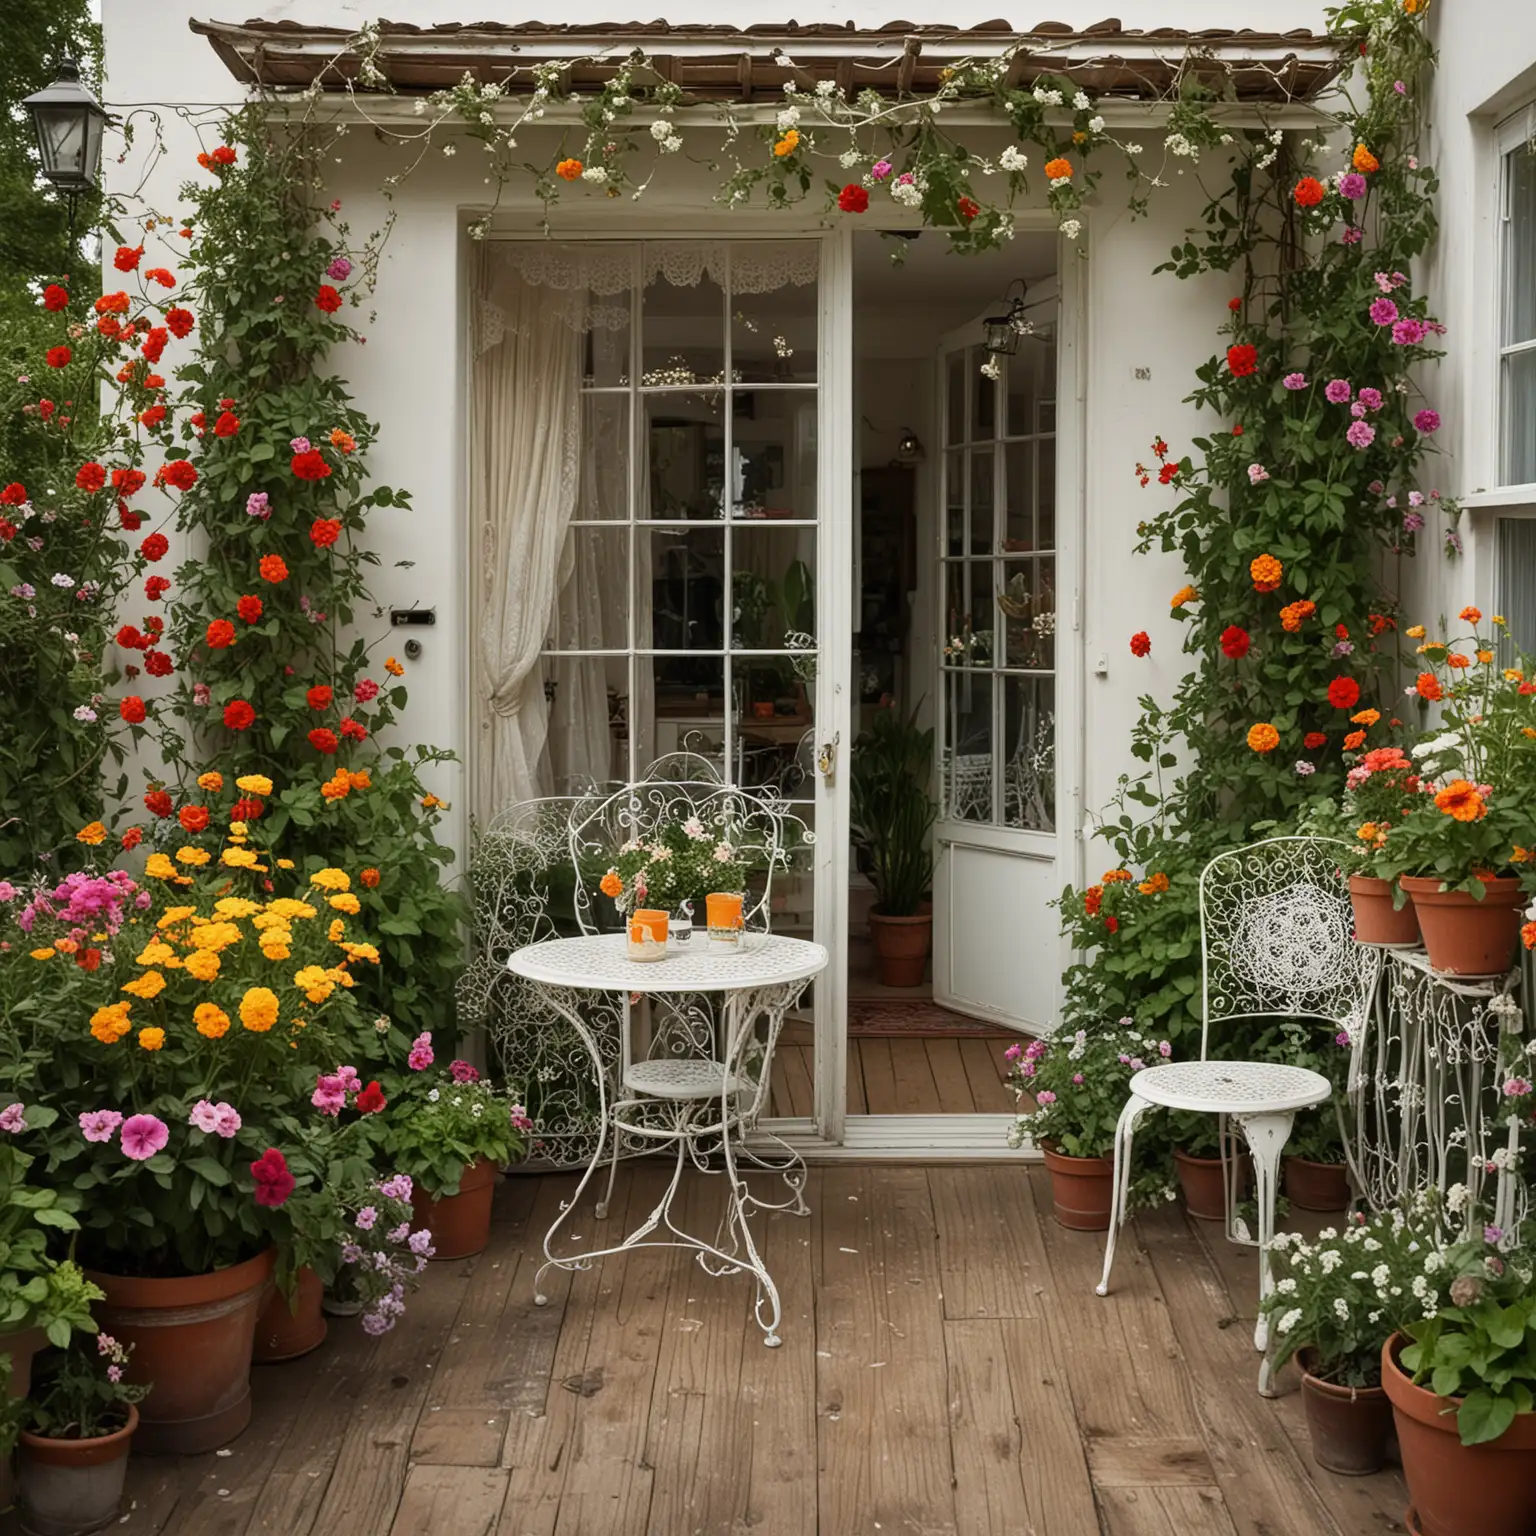 A wide shot of a garden-like balcony with wooden decking and a lattice railing covered in climbing plants. The space includes a vintage metal chair with a floral cushion, a small wrought-iron table, and numerous potted flowers, including petunias and marigolds. Lanterns and fairy lights create a magical ambiance. French doors with white frames and delicate lace curtains lead inside.